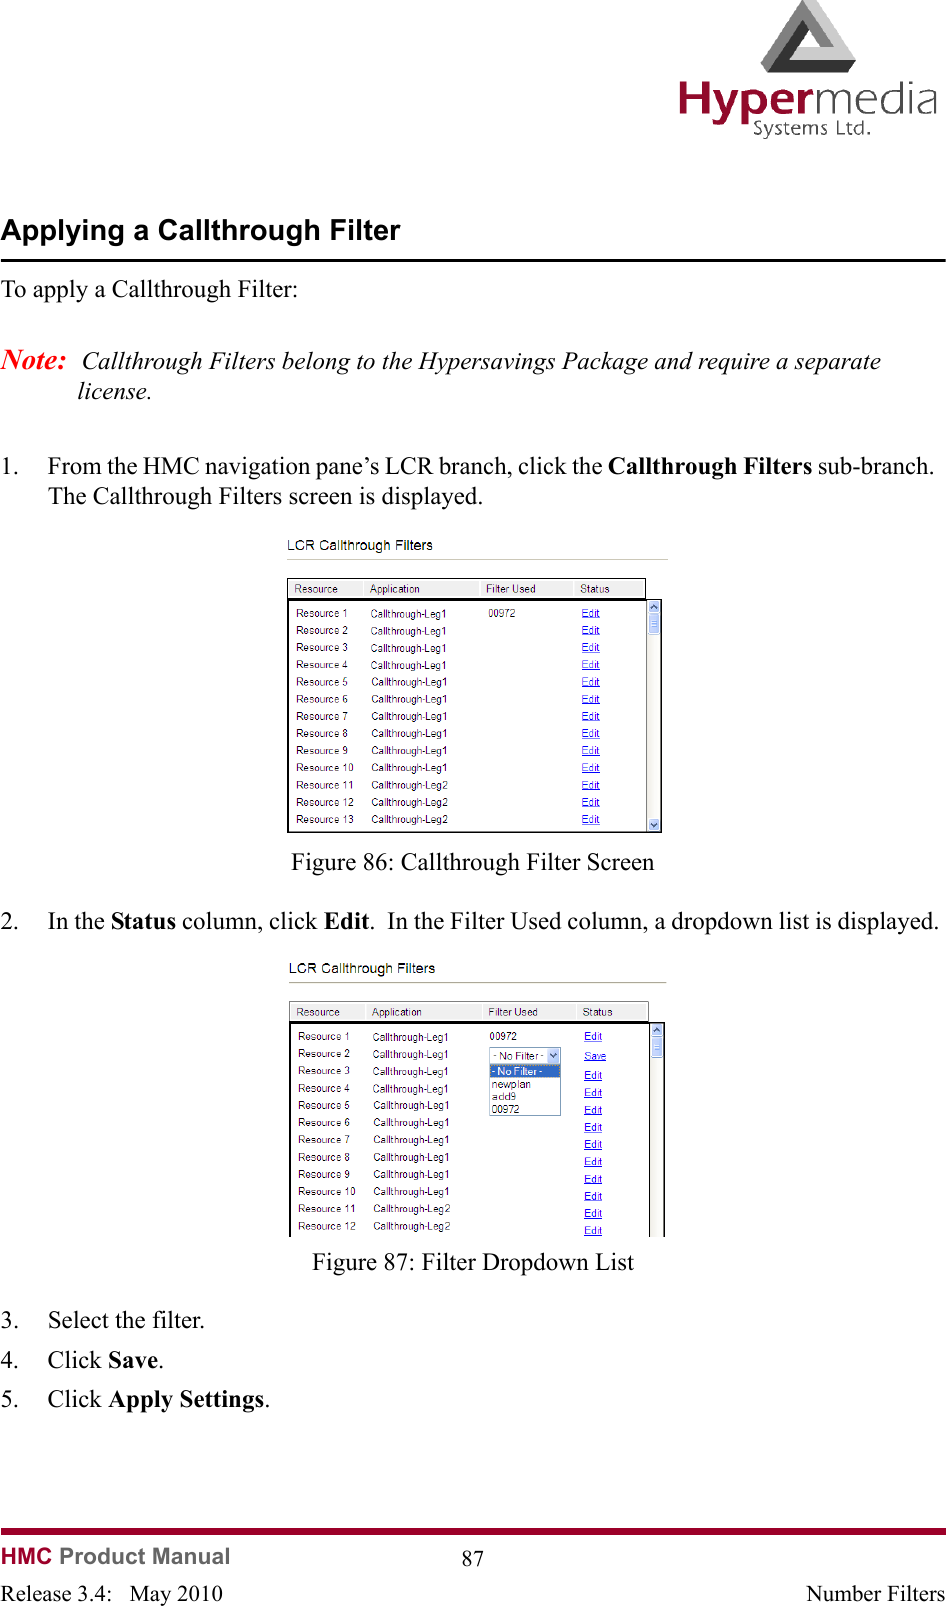 HMC Product Manual  87Release 3.4:   May 2010 Number FiltersApplying a Callthrough FilterTo apply a Callthrough Filter:Note:  Callthrough Filters belong to the Hypersavings Package and require a separate license.1. From the HMC navigation pane’s LCR branch, click the Callthrough Filters sub-branch.  The Callthrough Filters screen is displayed.              Figure 86: Callthrough Filter Screen2. In the Status column, click Edit.  In the Filter Used column, a dropdown list is displayed.               Figure 87: Filter Dropdown List3. Select the filter.4. Click Save.5. Click Apply Settings.